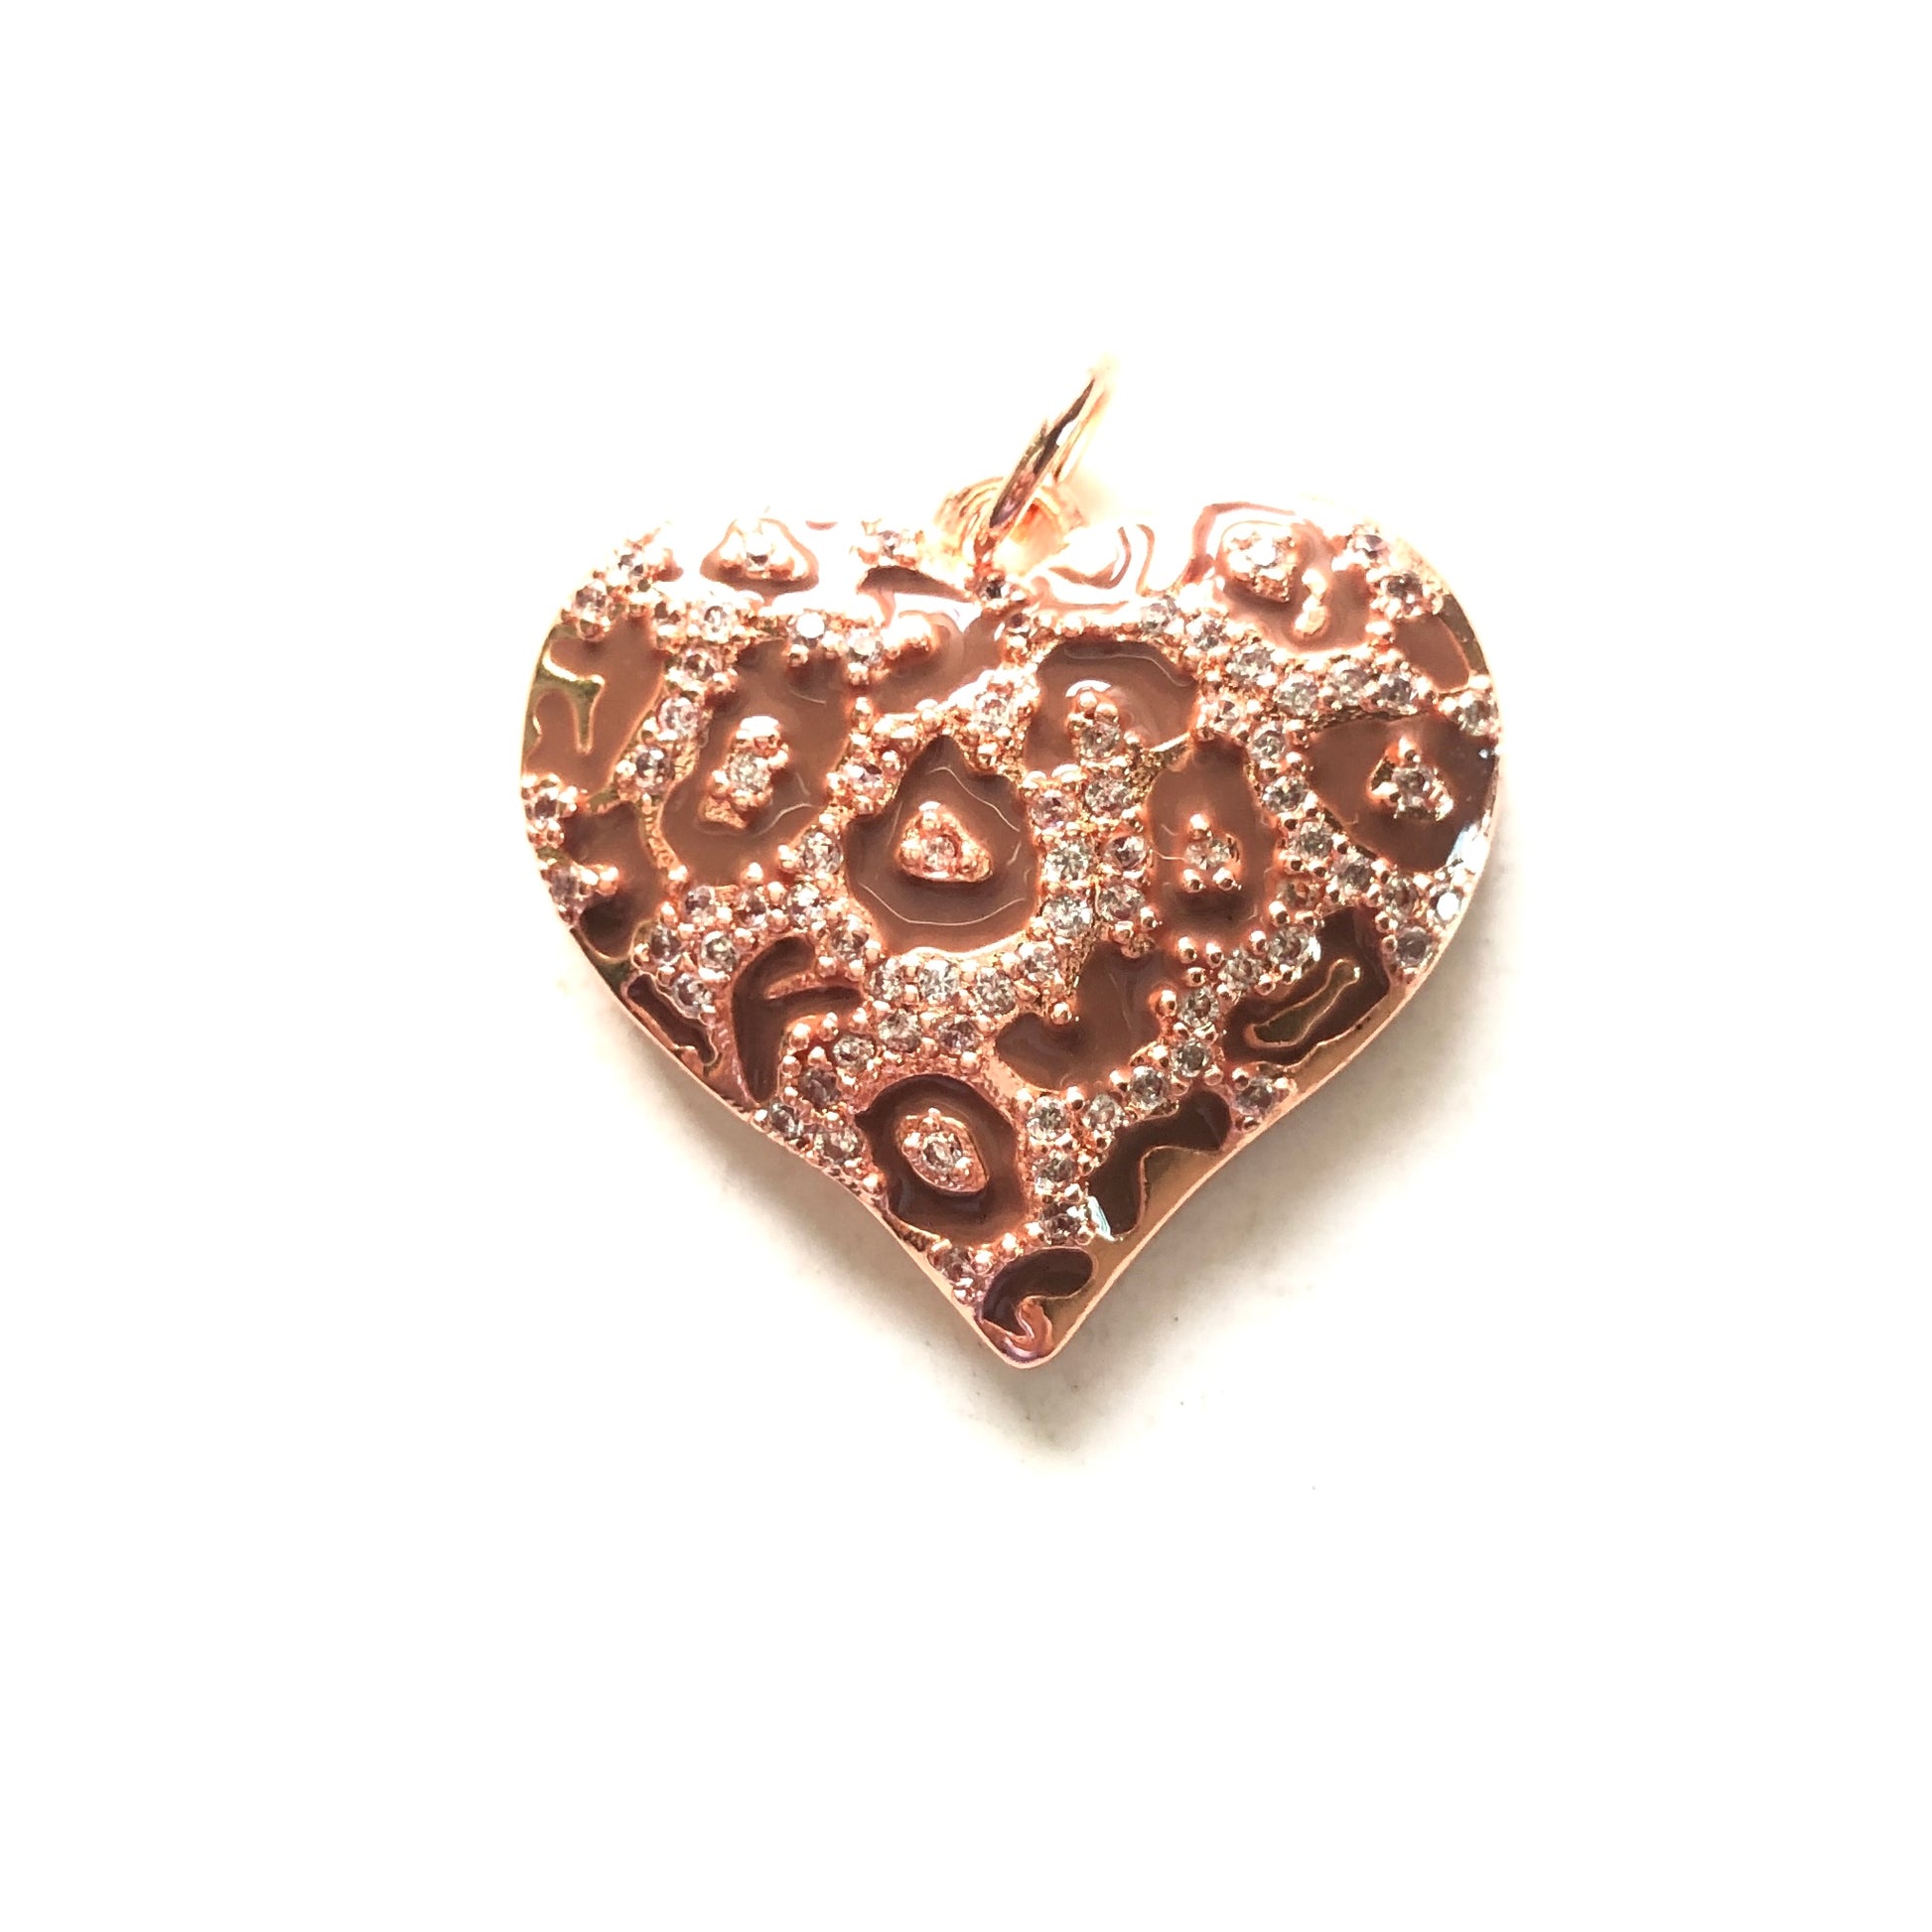 10/lot 24.5*22mm CZ Paved Brown Leopard Print Heart Charm Pendants Rose Gold CZ Paved Charms Hearts Leopard Printed New Charms Arrivals Charms Beads Beyond